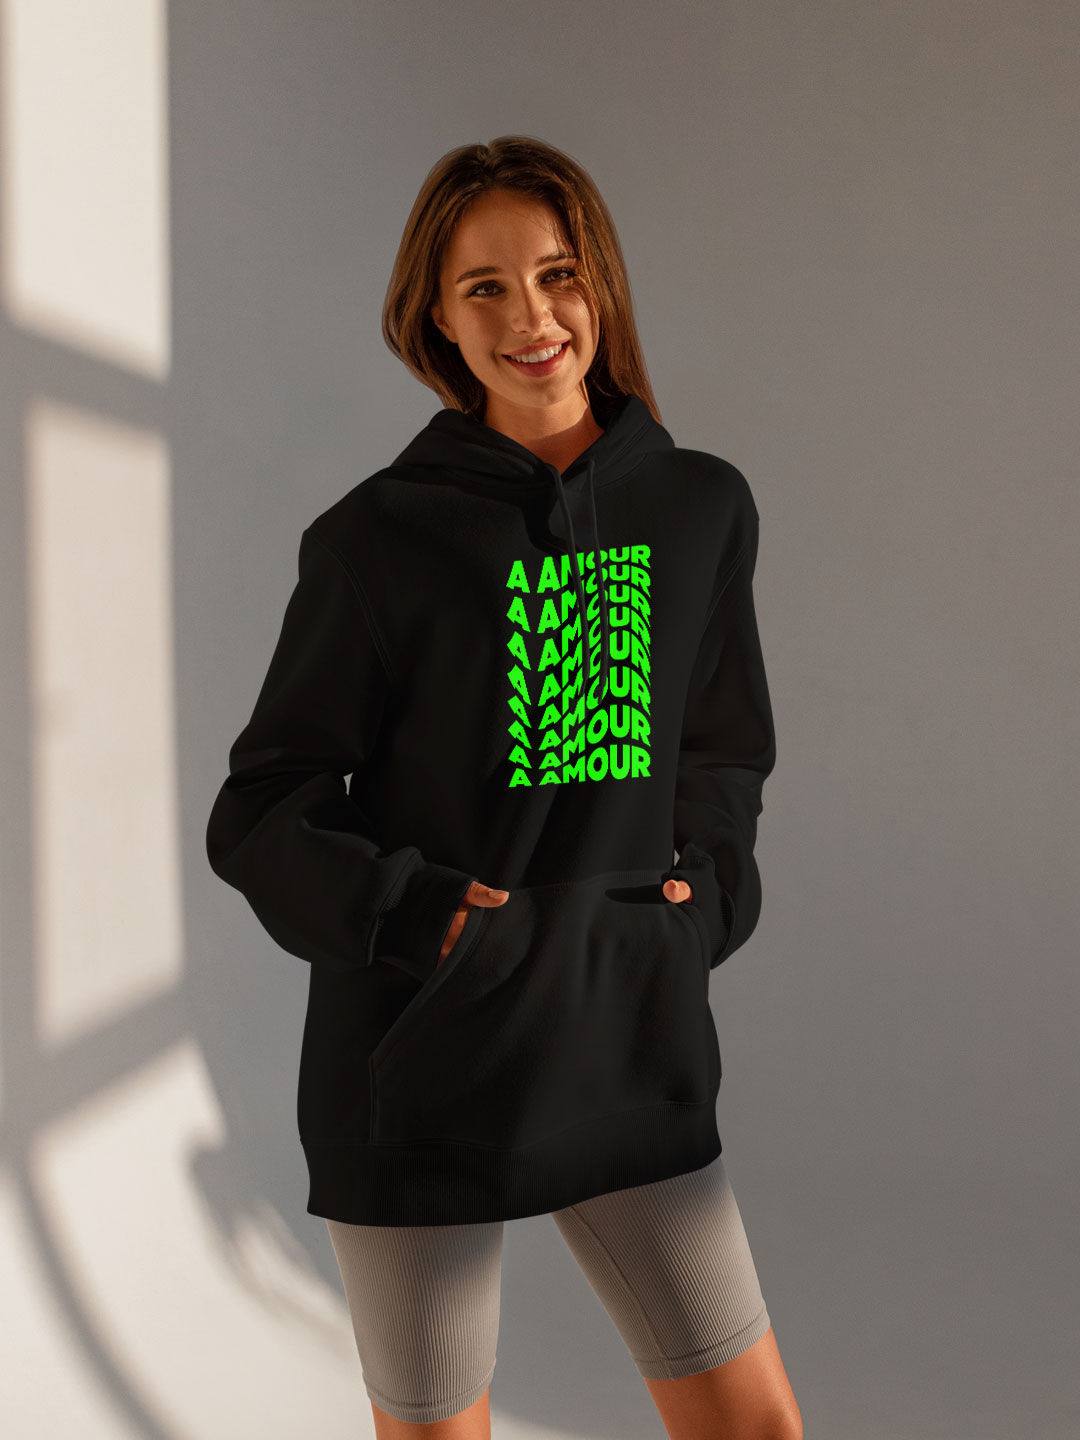 A Amour - Womens Hoodie Black